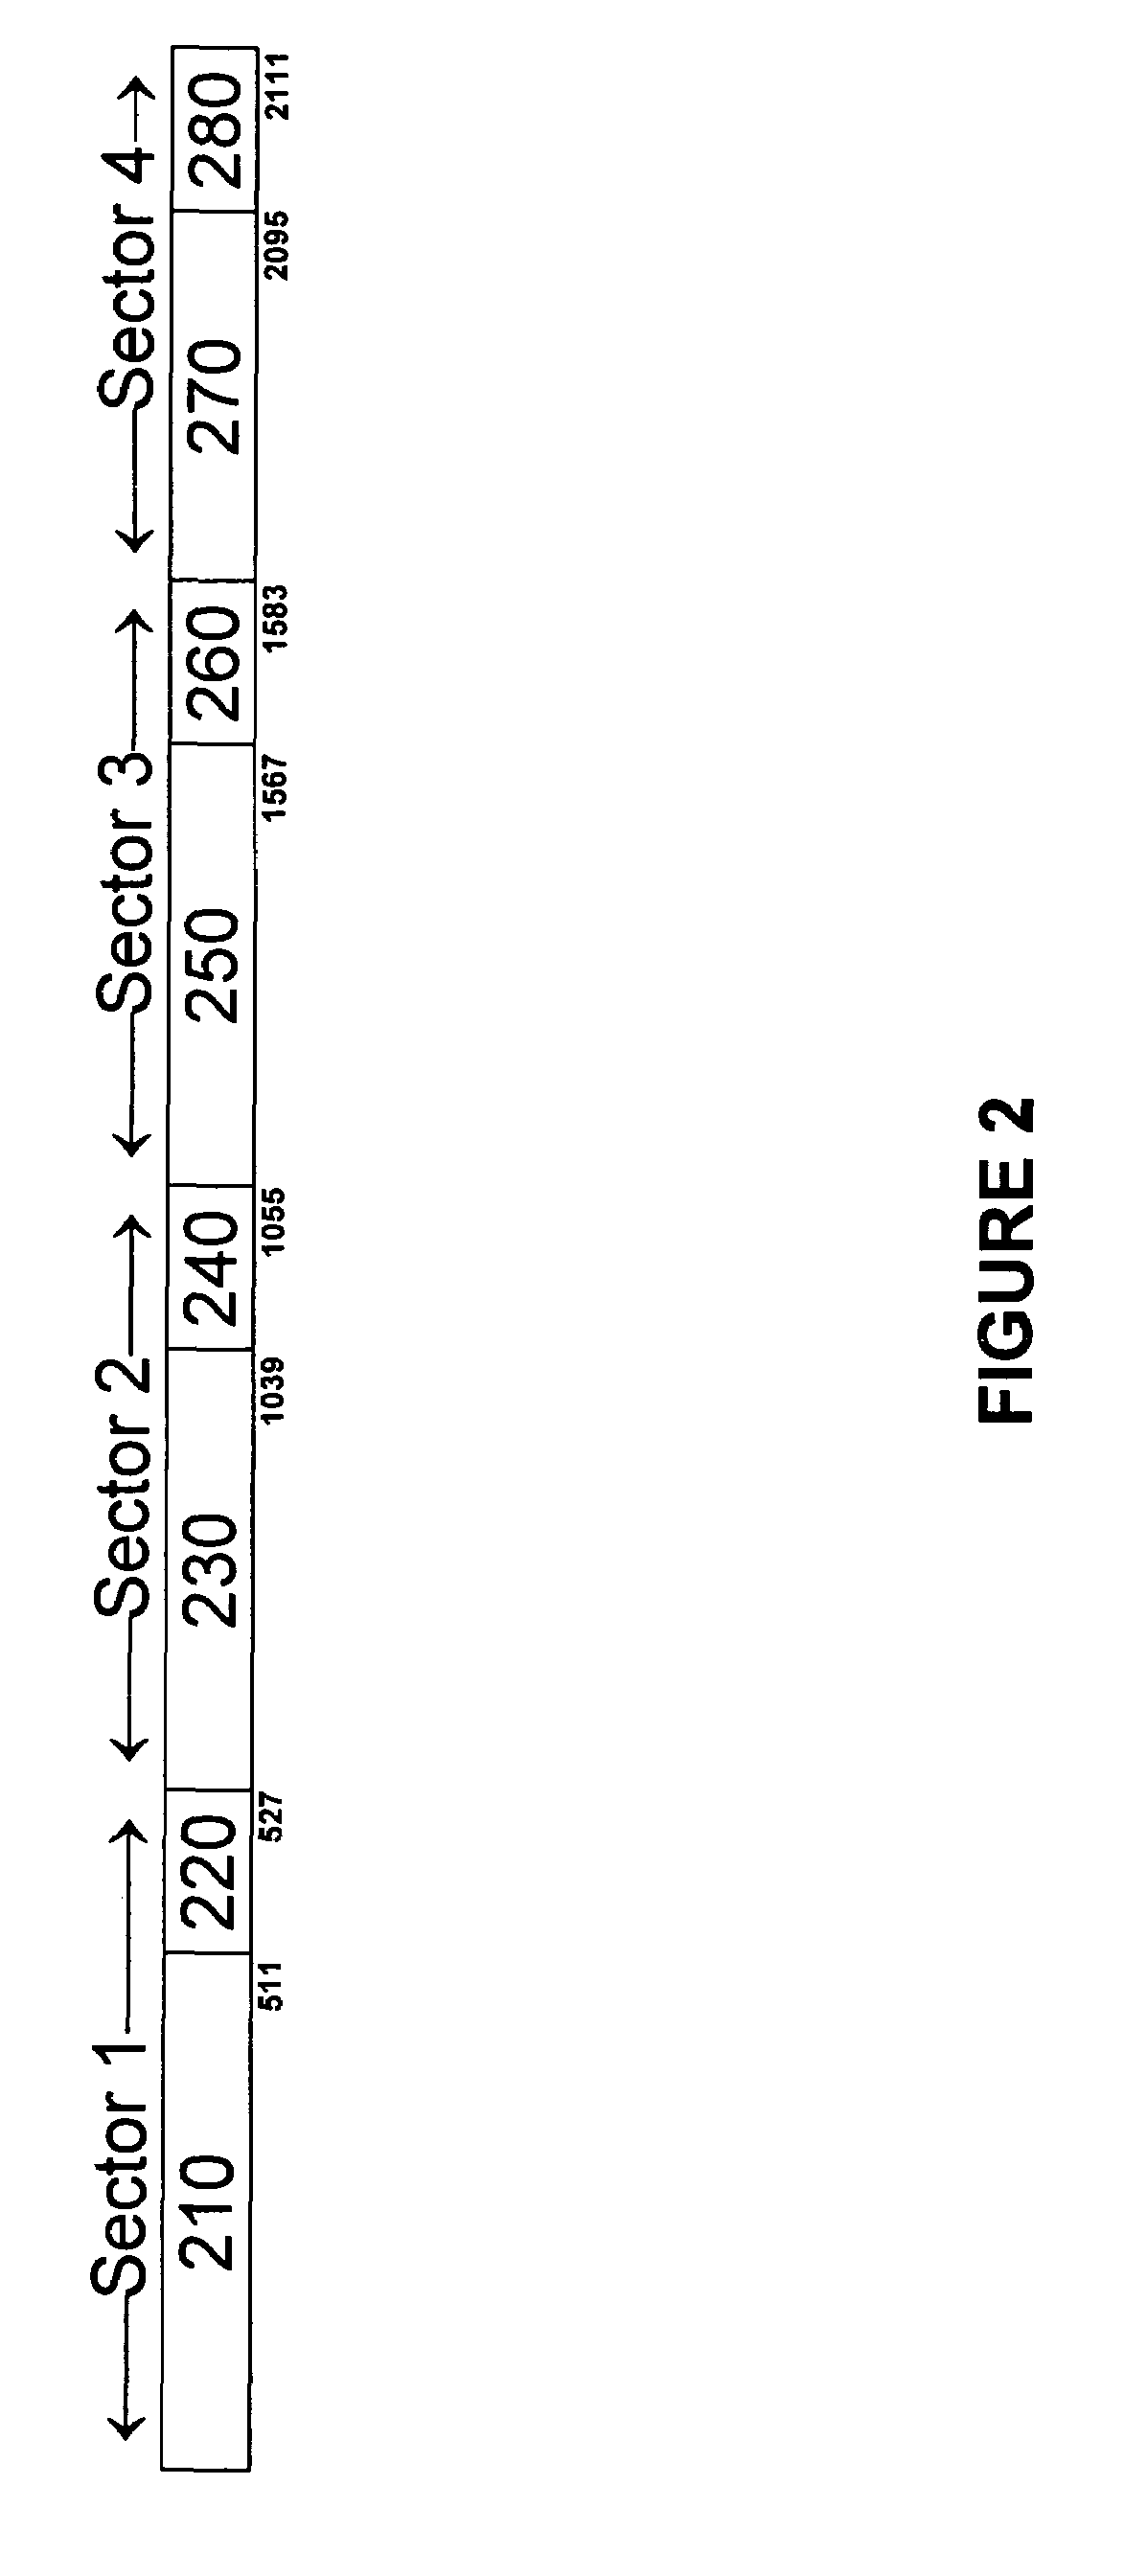 Method of storing control information in a large-page flash memory device